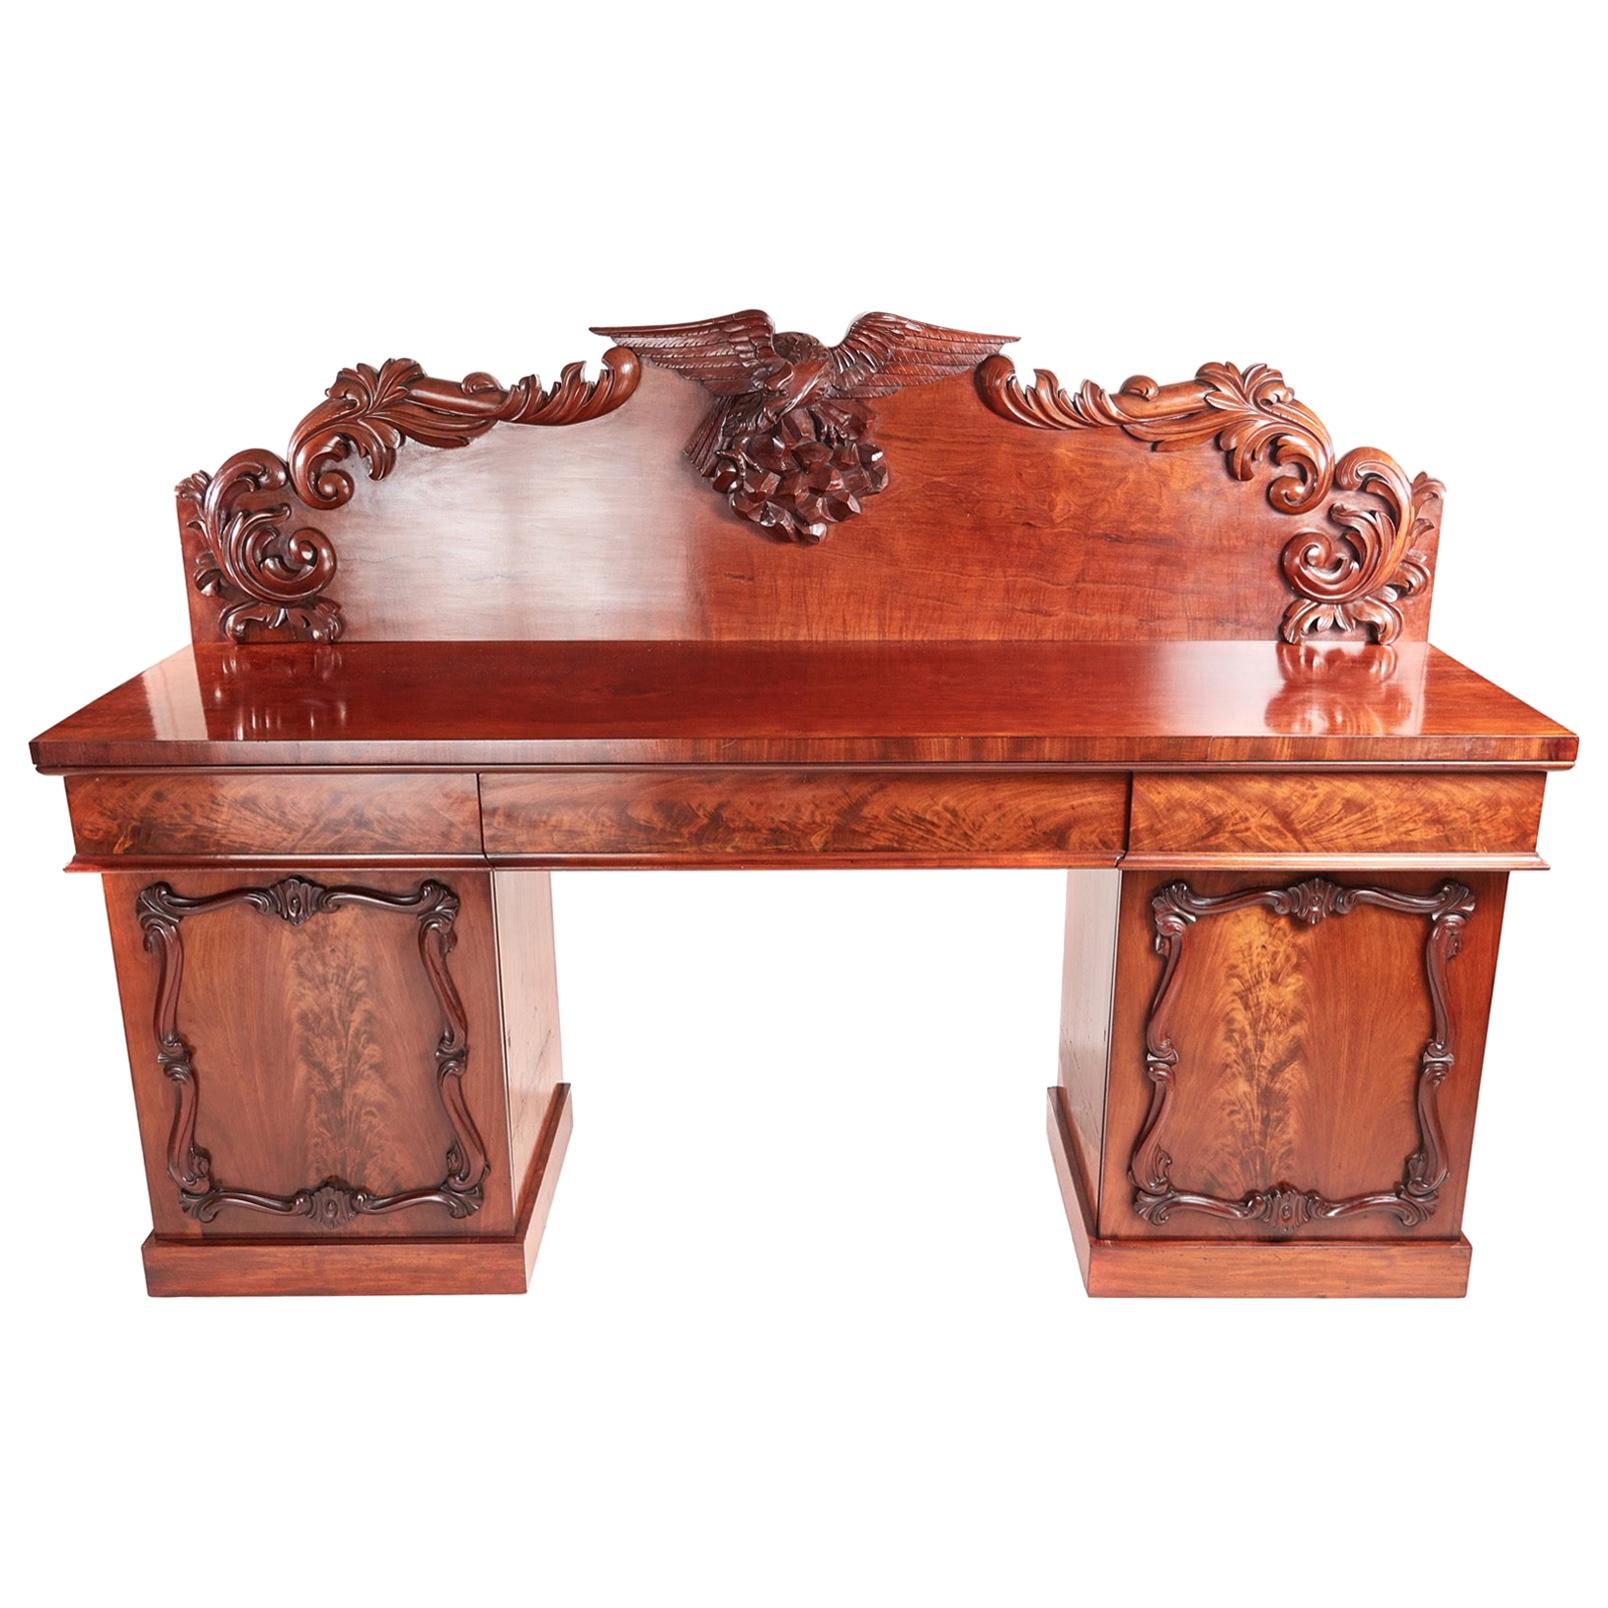 Antique Victorian Carved Mahogany Sideboard, circa 1860 For Sale